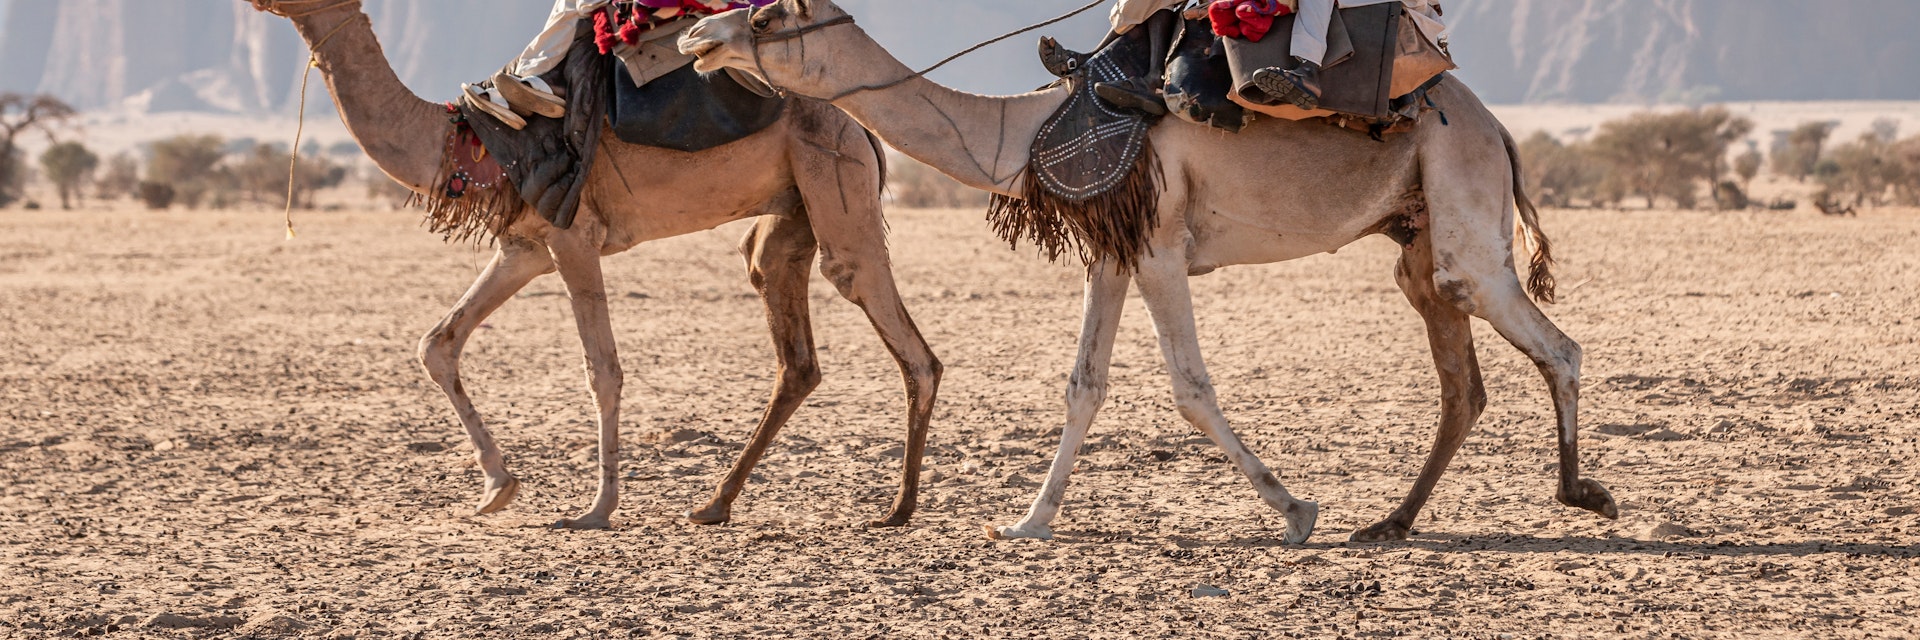 Nomad with camels in the Sahara desert, Chad, November 17, 2017; Shutterstock ID 1565647990; your: Sloane Tucker; gl: 65050; netsuite: Online Editorial; full: Destination Page
1565647990